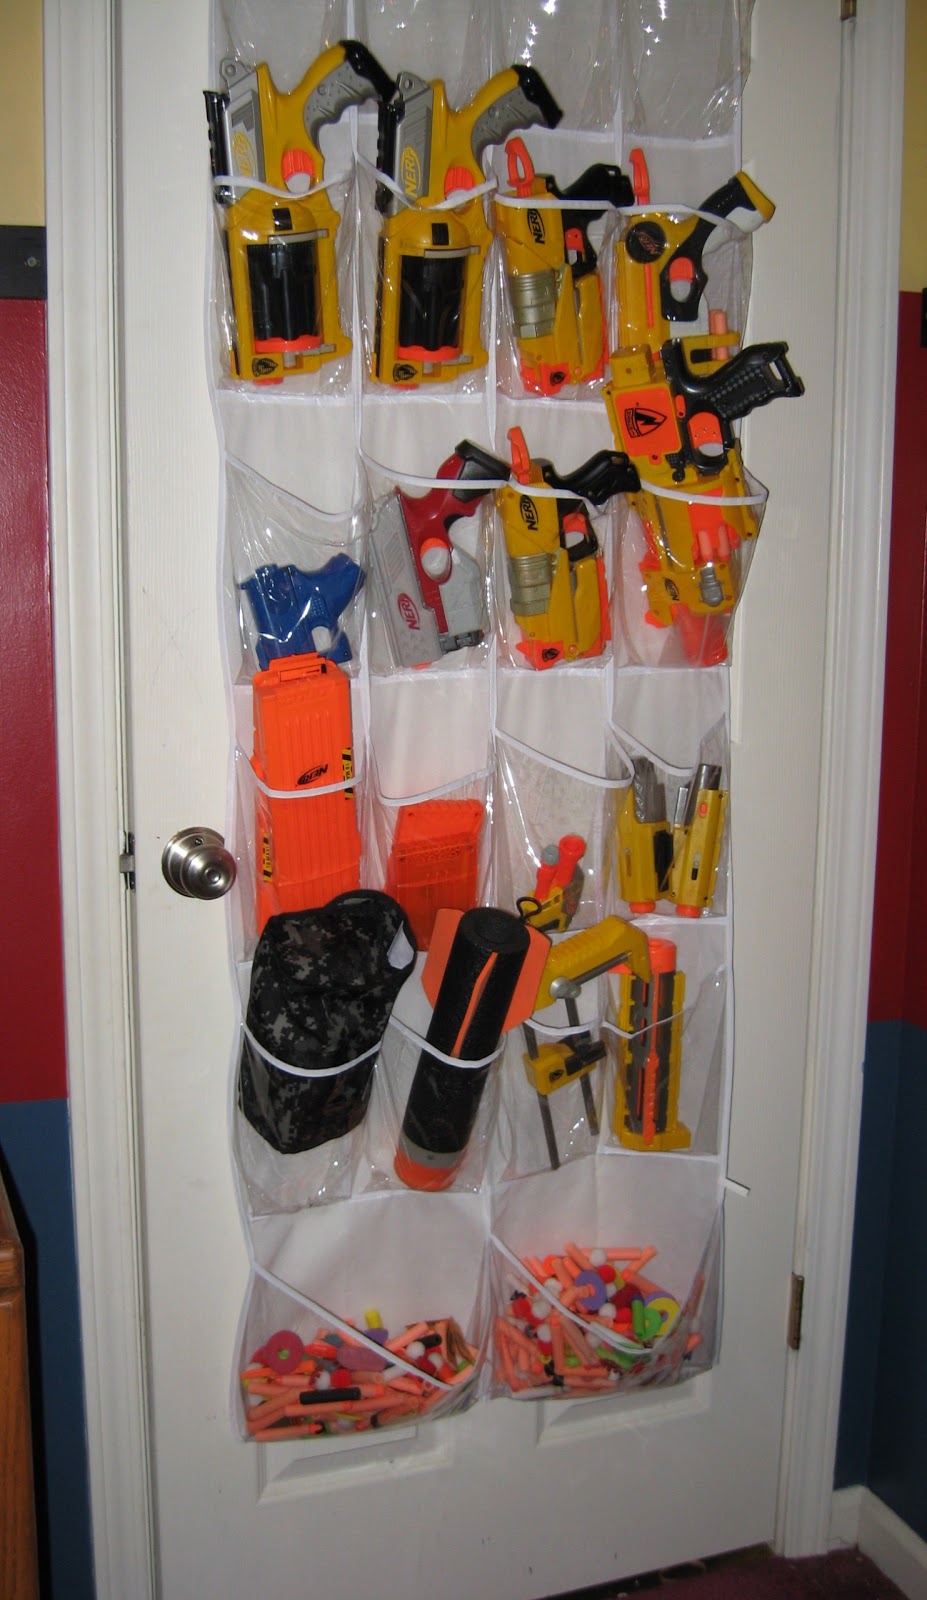 Moore Magnets: Shoe Racks as Toy Storage